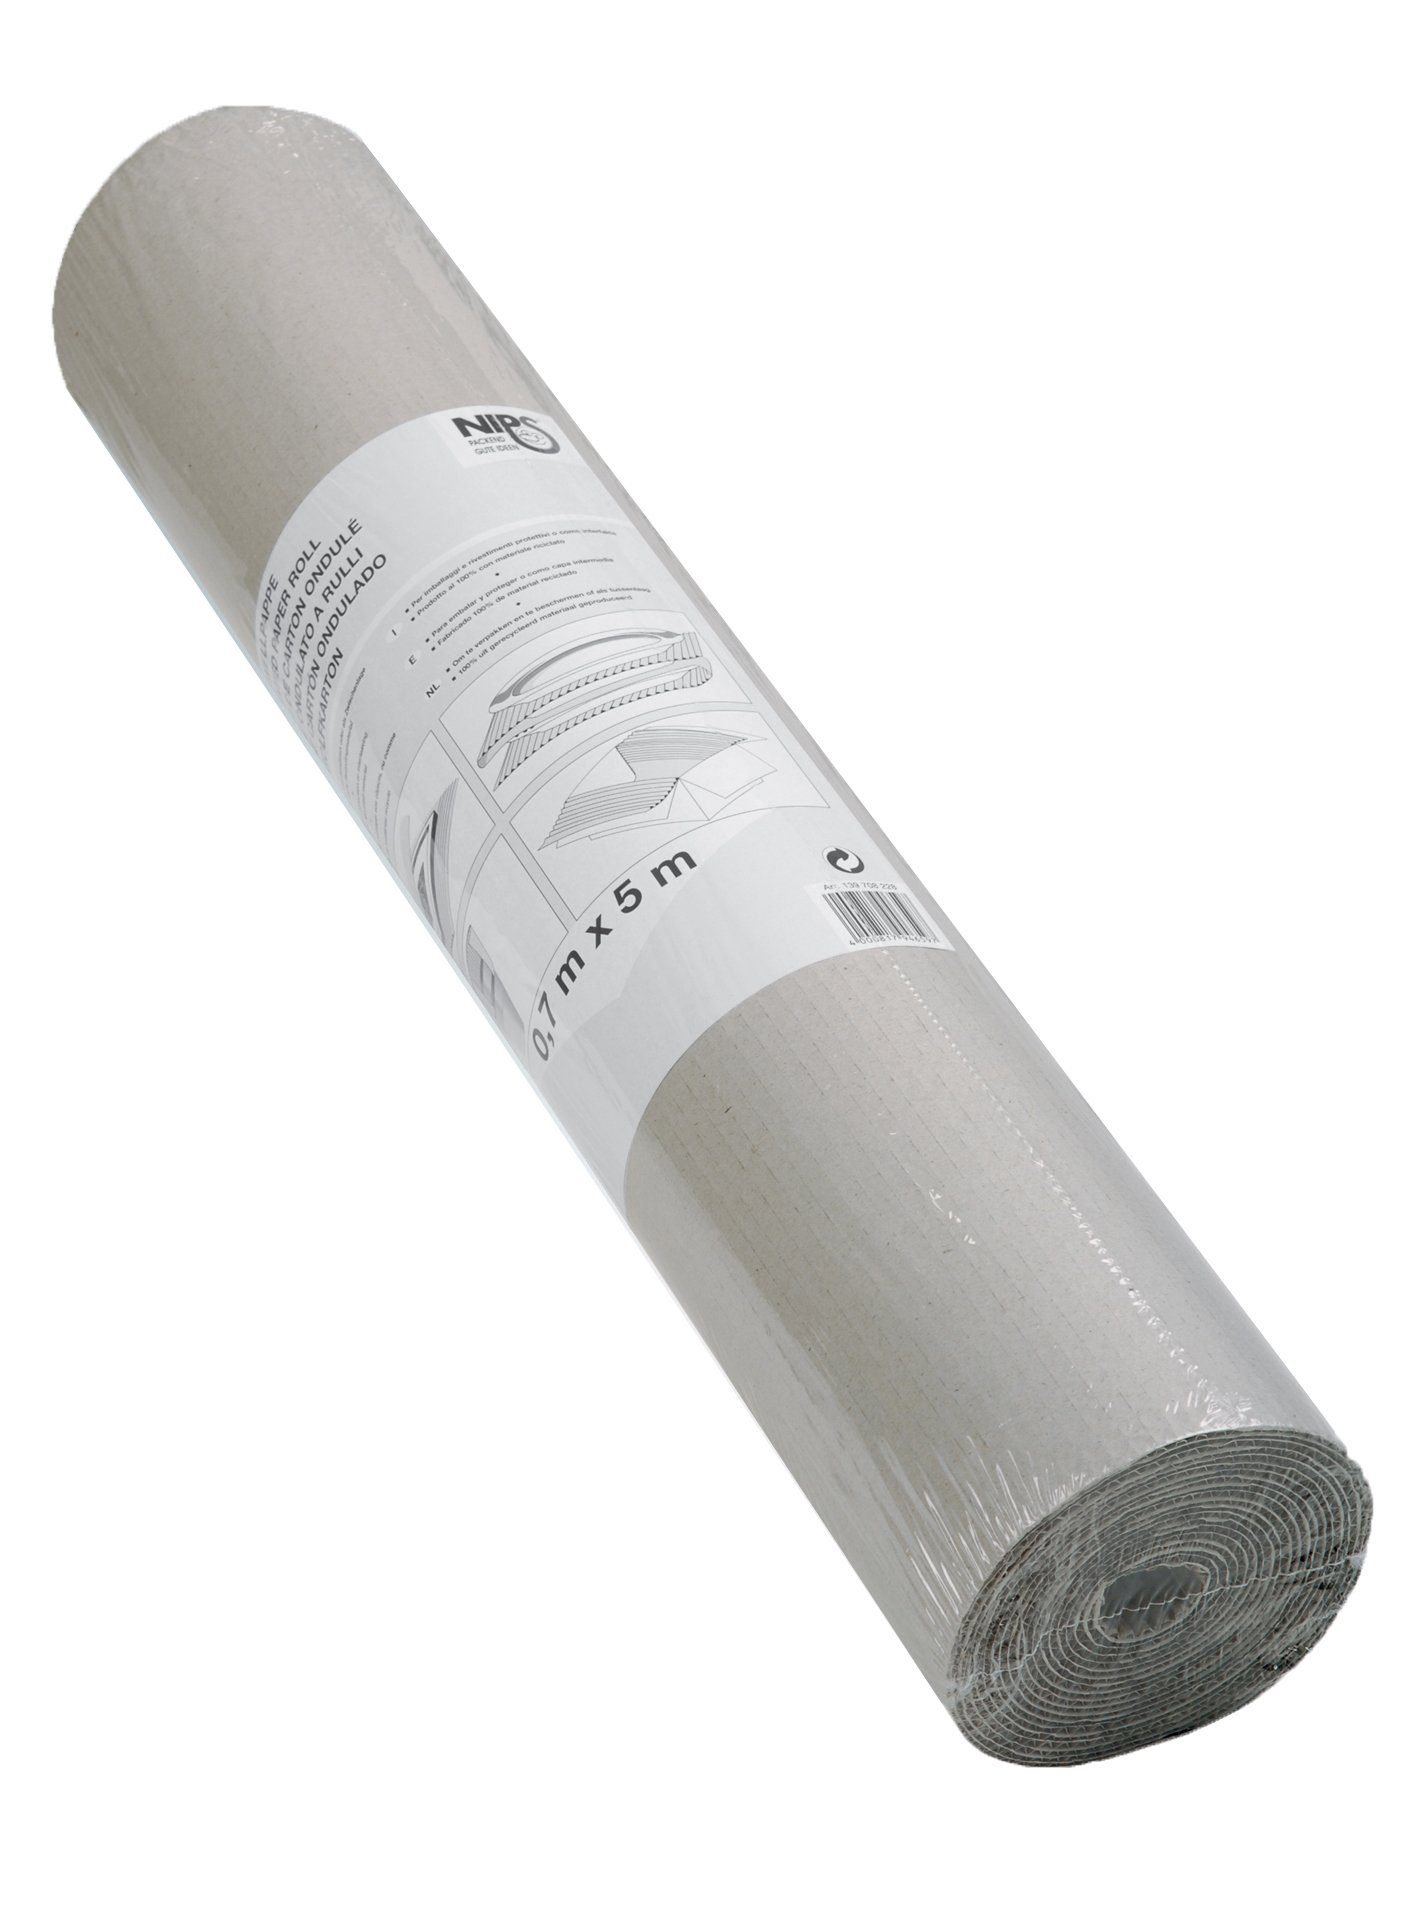 cm Packpapier 5 m ROLLEN-WELLPAPPE NIPS Polstermaterial, 70 x Recycling-Wellpappe